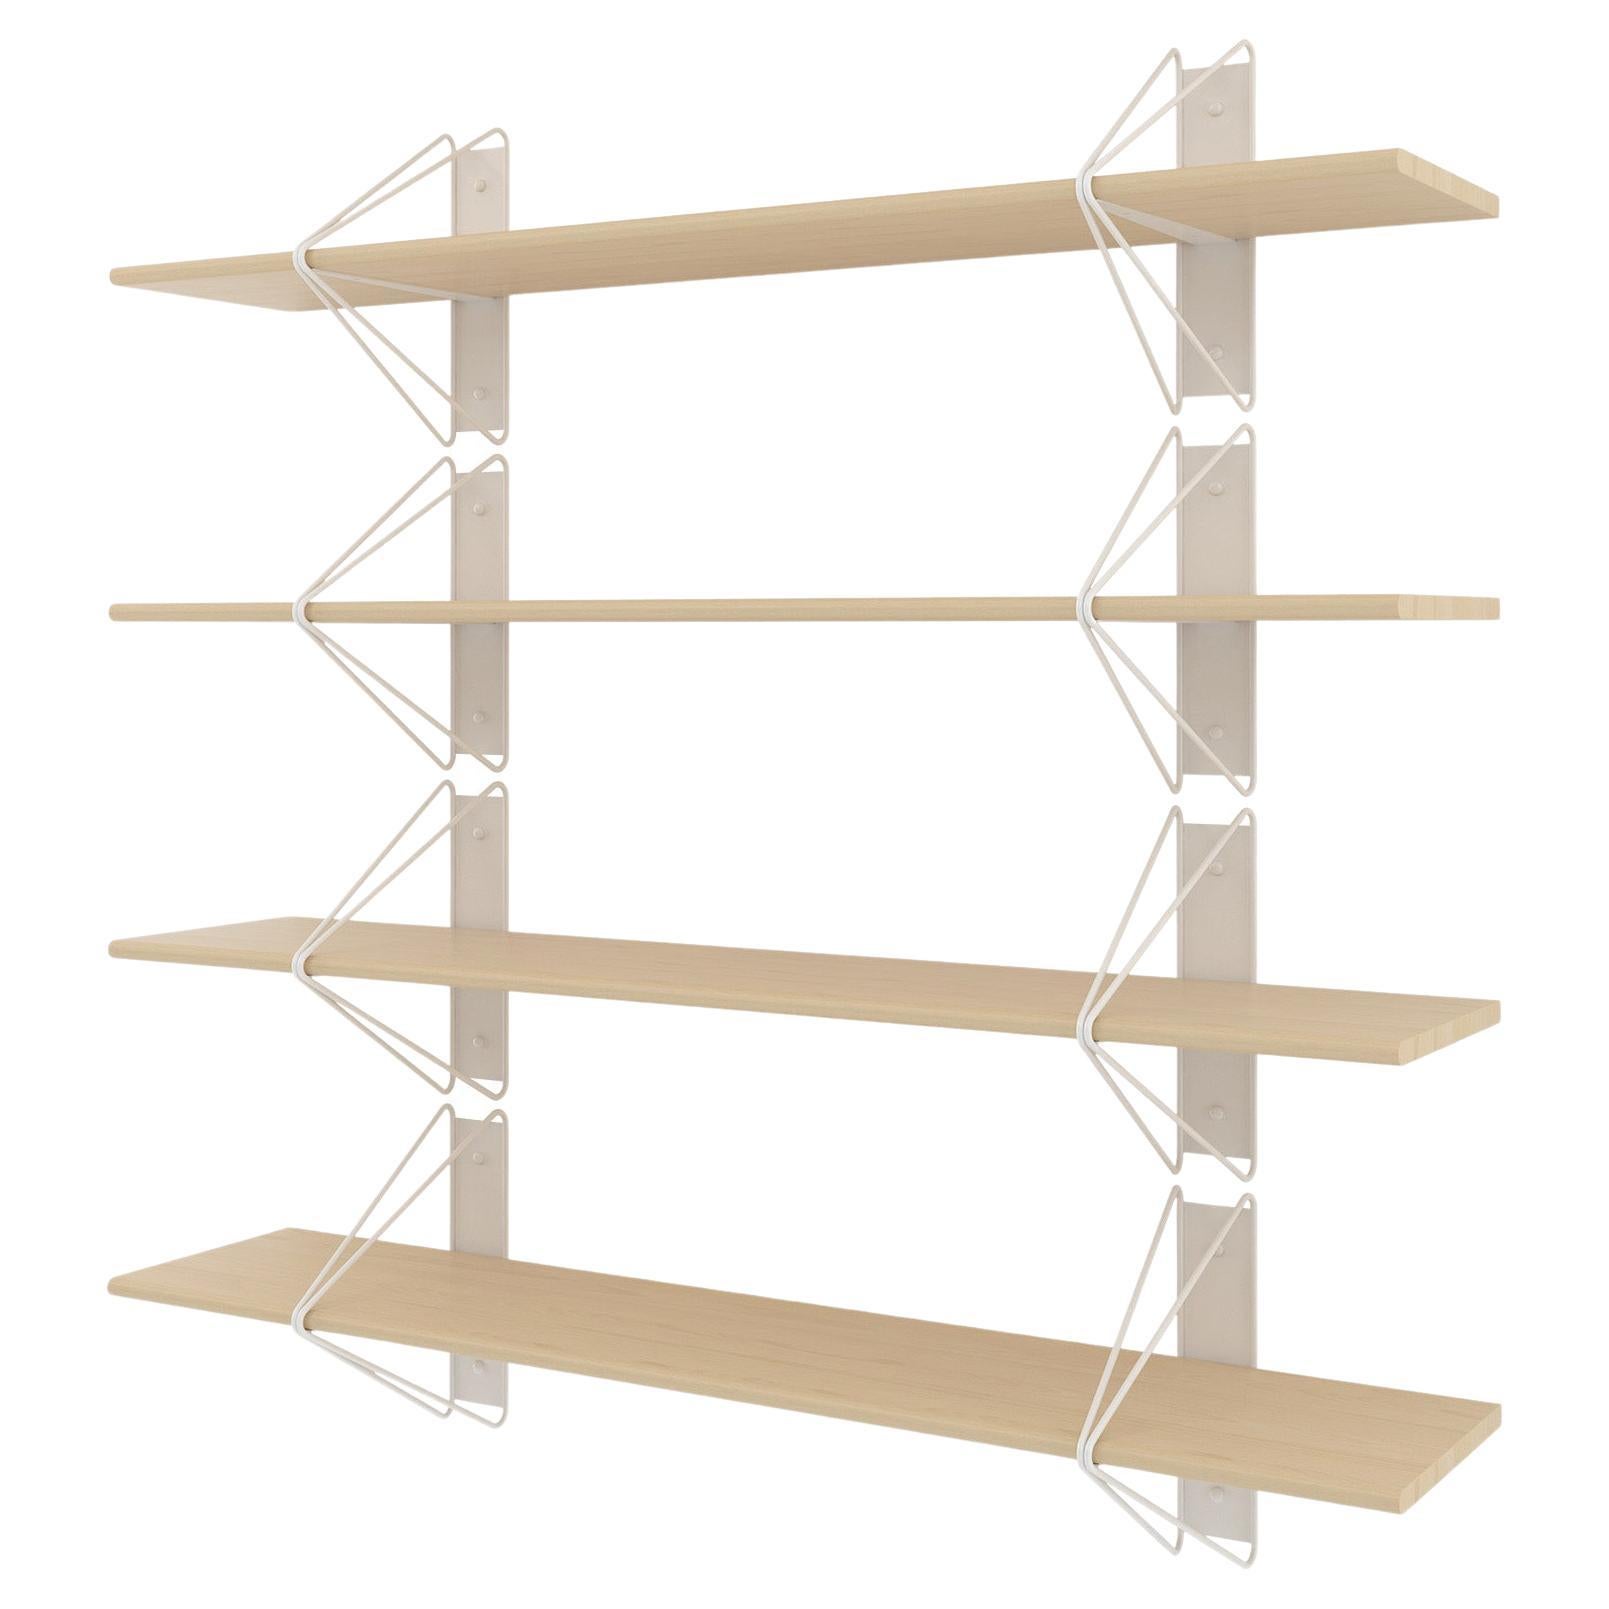 Set of 4 Strut Shelves from Souda, White and Maple, Made to Order